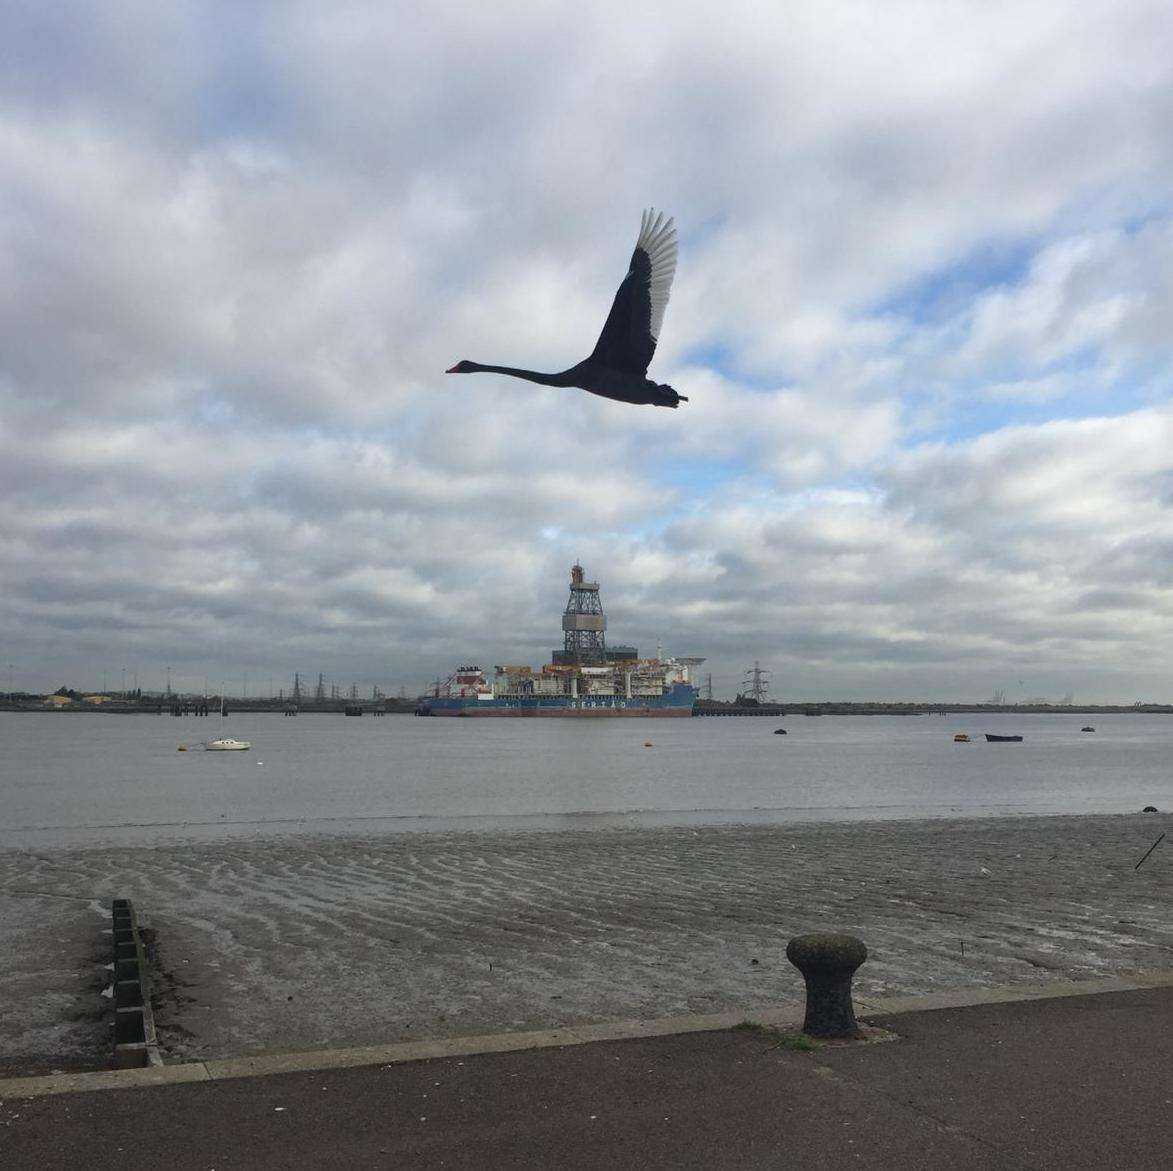 Anna Armstrong took this photo of the black swan on Gravesend Promenade